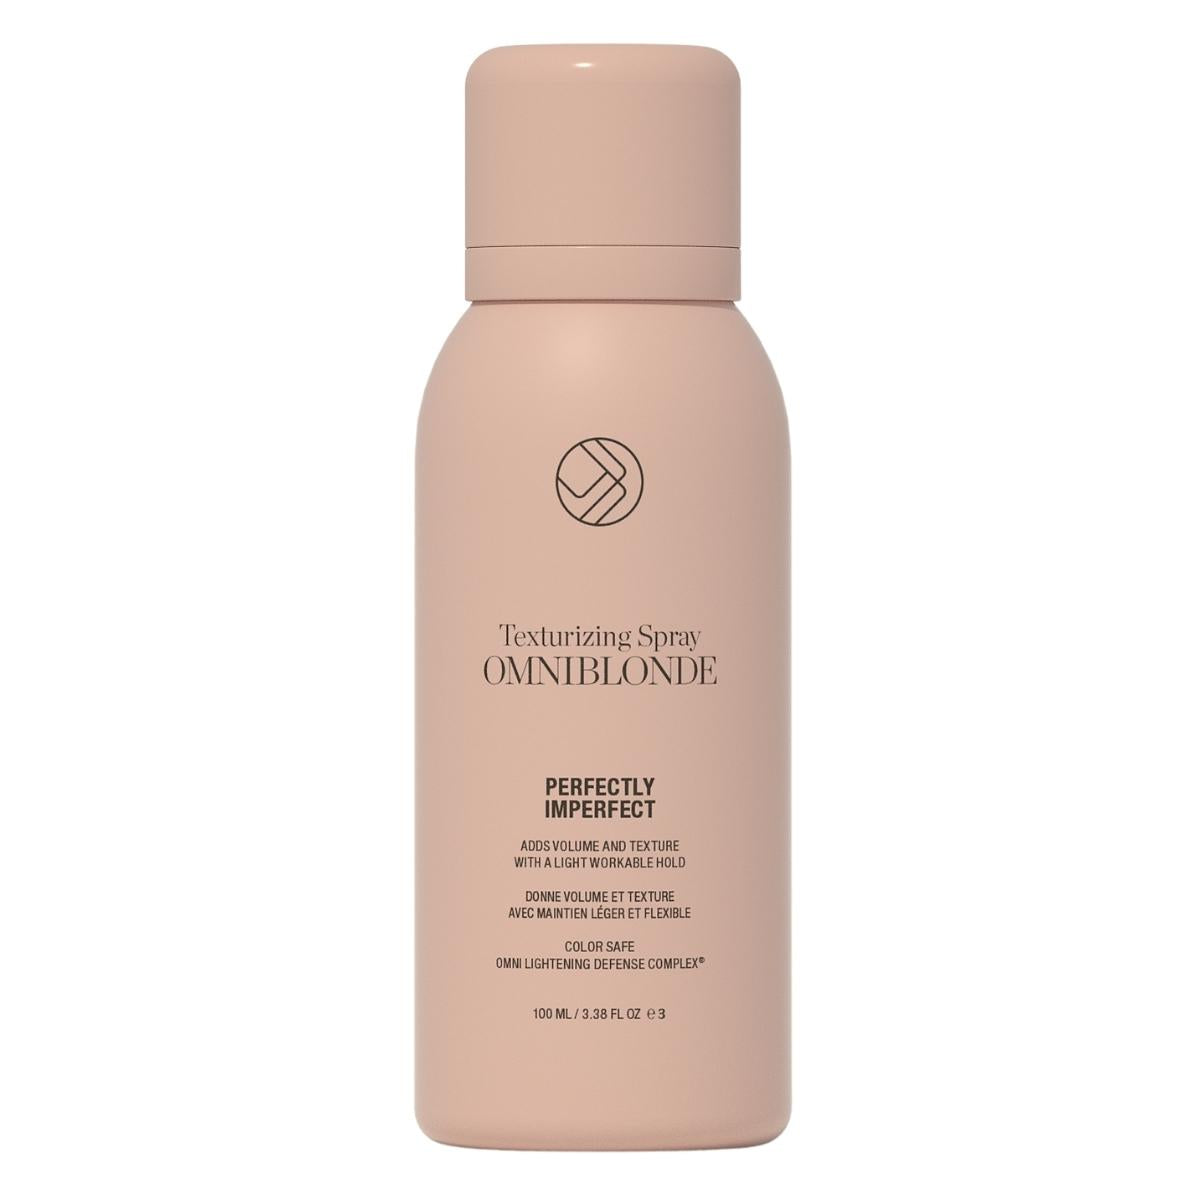 Omniblonde Perfectly Imperfect Texturing Spray 100ml.